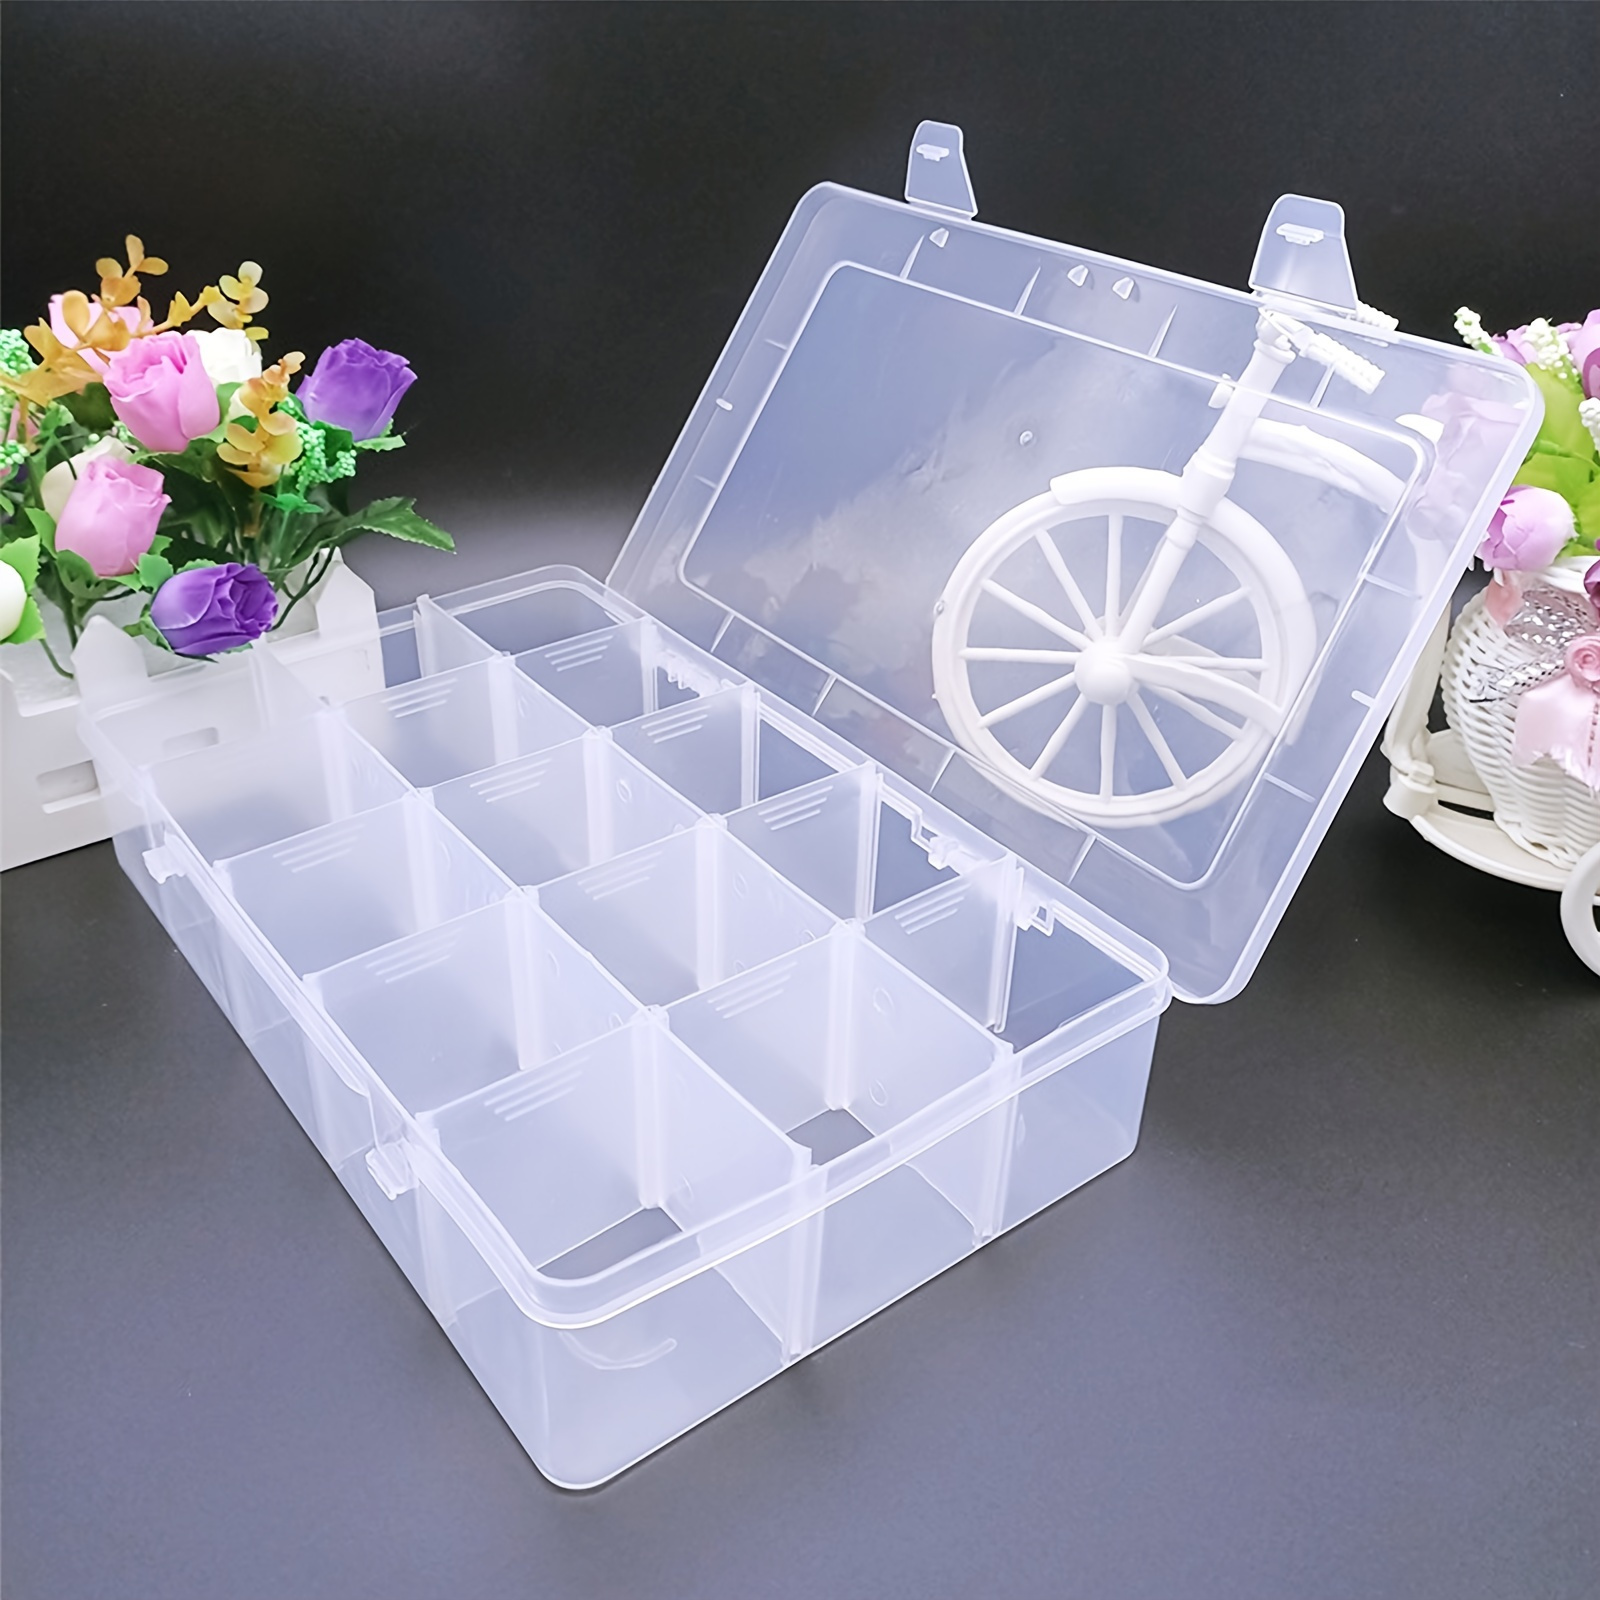 15 Large Grids Plastic Organizer Box Clear Adjustable Compartments Storage  Container with Dividers - Perfect for Sorting and Storing Small Items Like